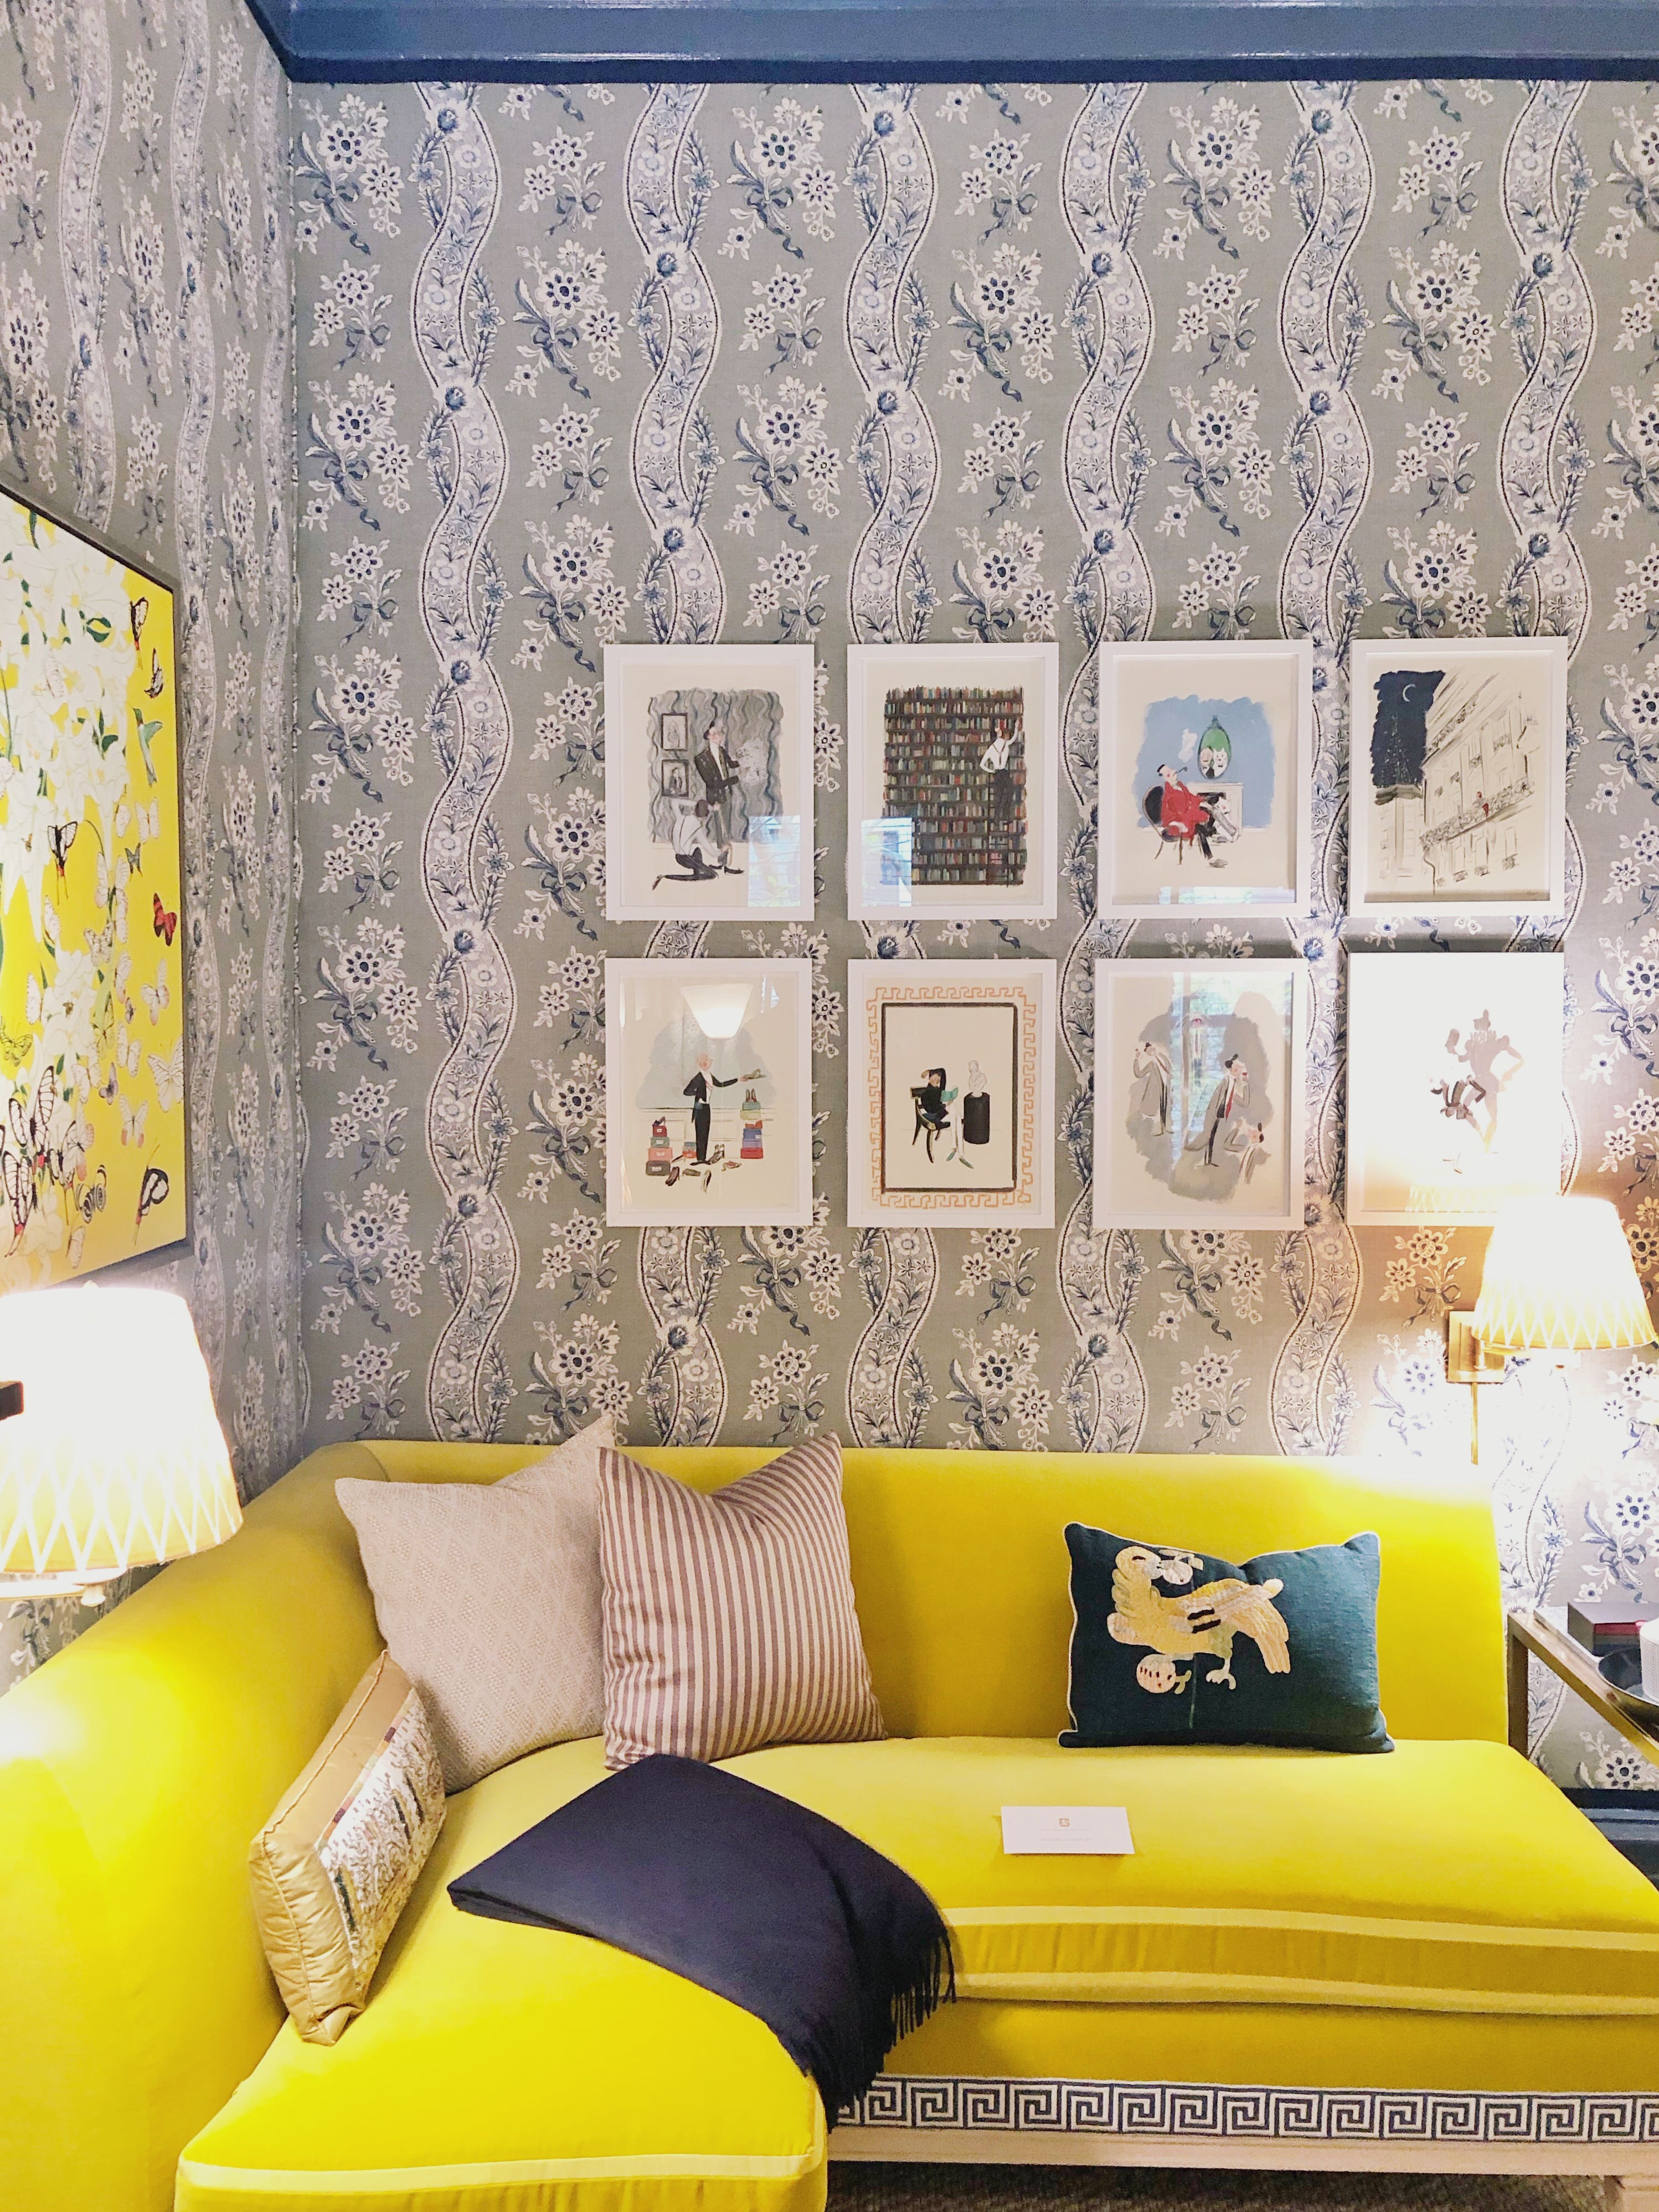 Great News: You Can Shop the Coolest Wallpapers from the Kips Bay Show House